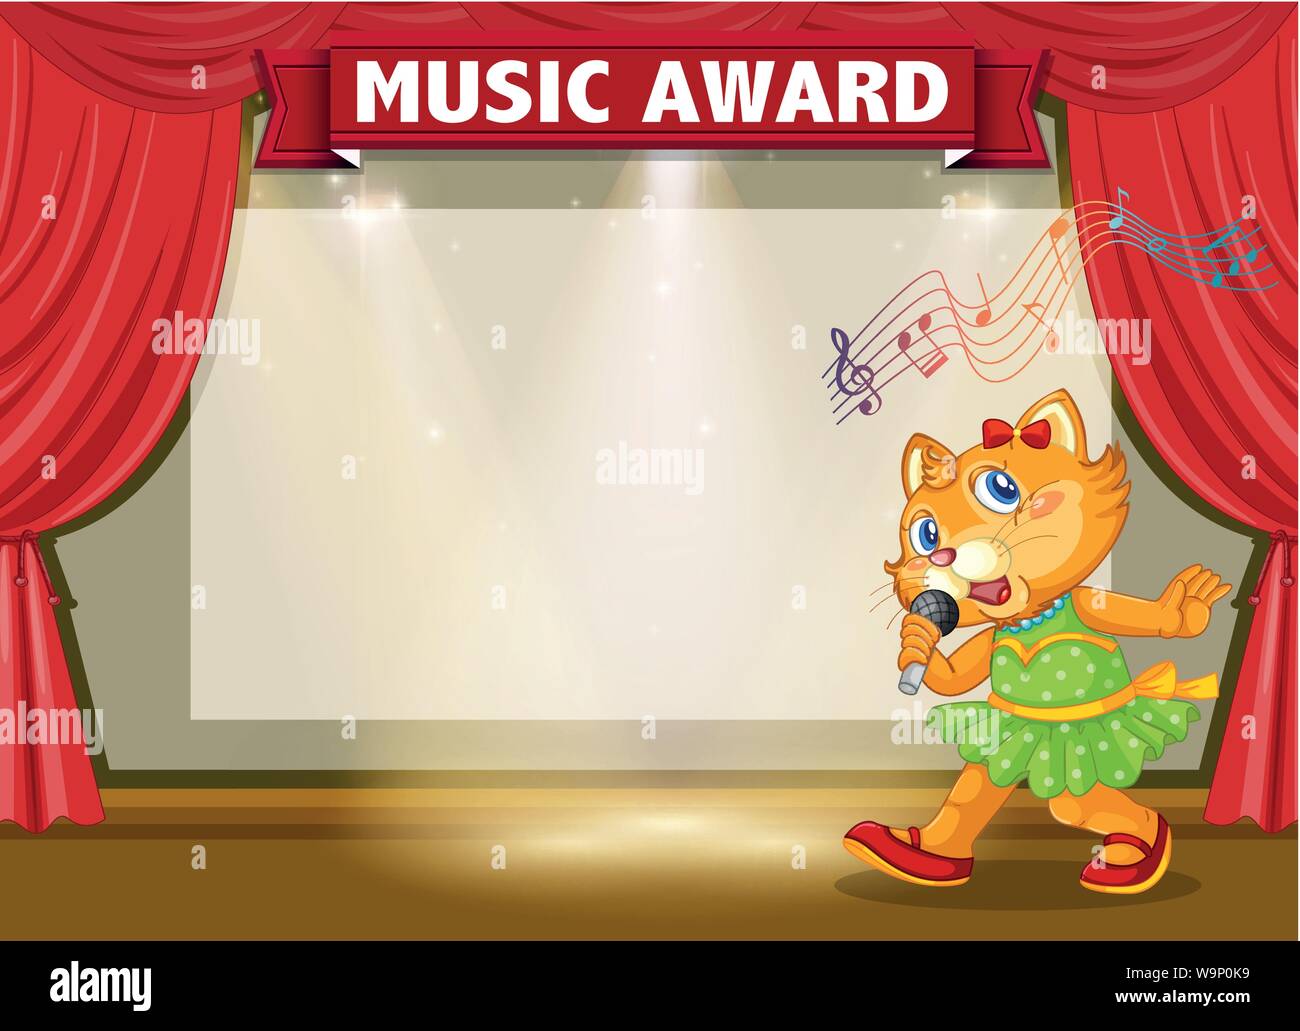 Music award with cat singing illustration Stock Vector